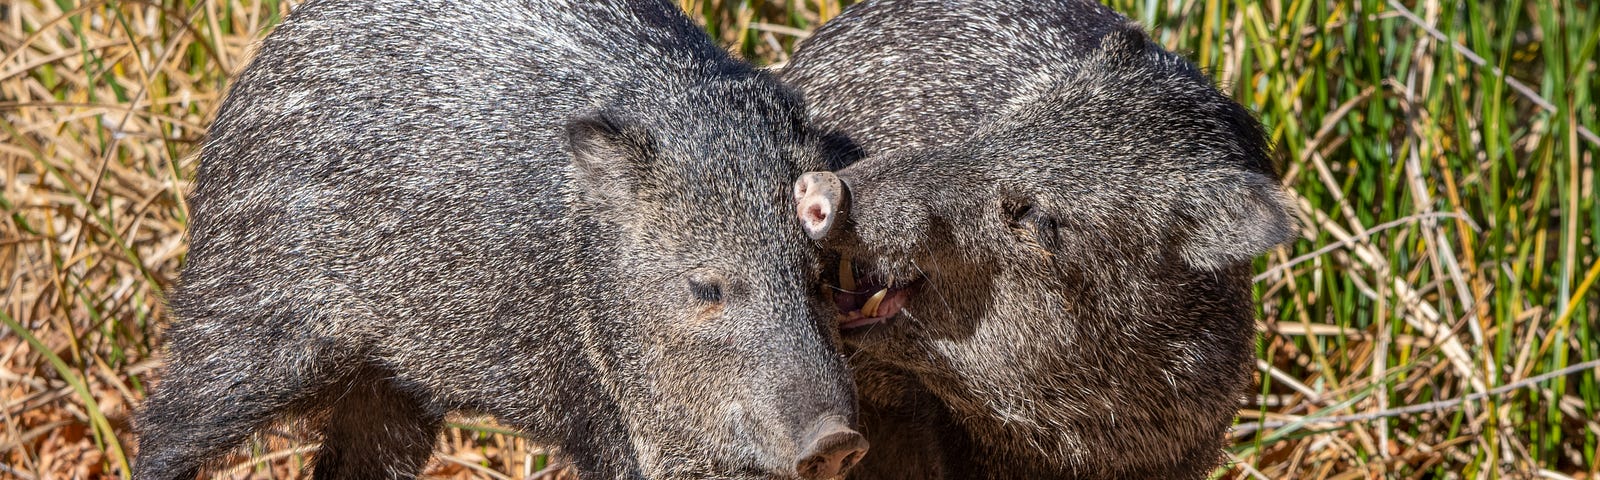 Two collared peccary grooming each other